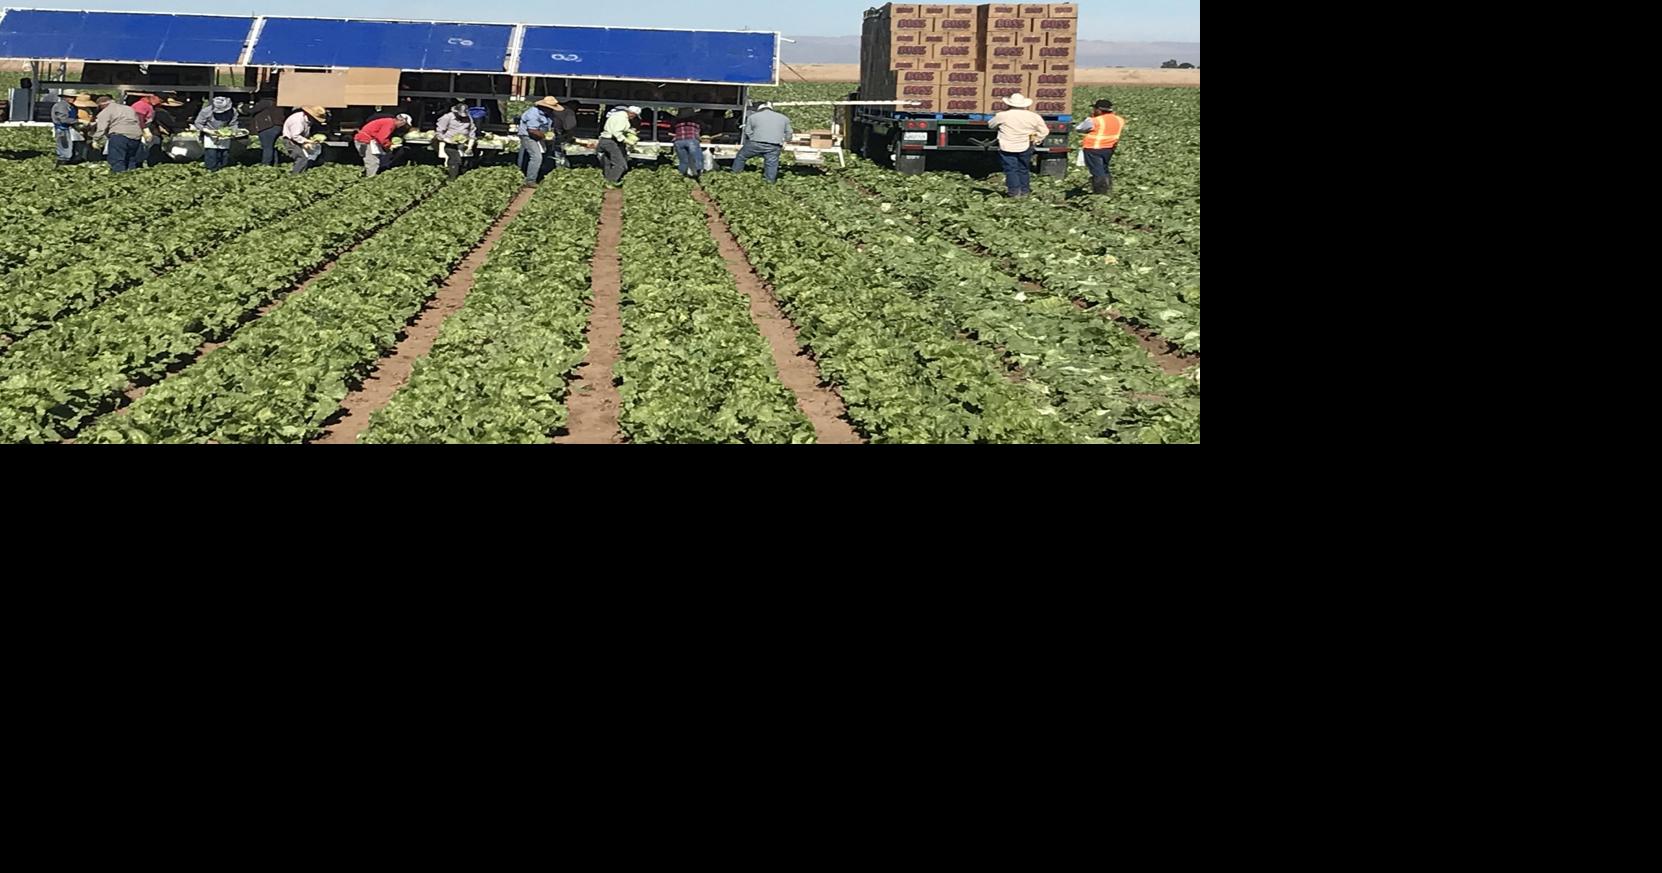 New shutdowns complicate farms’ plans | News | thedesertreview.com